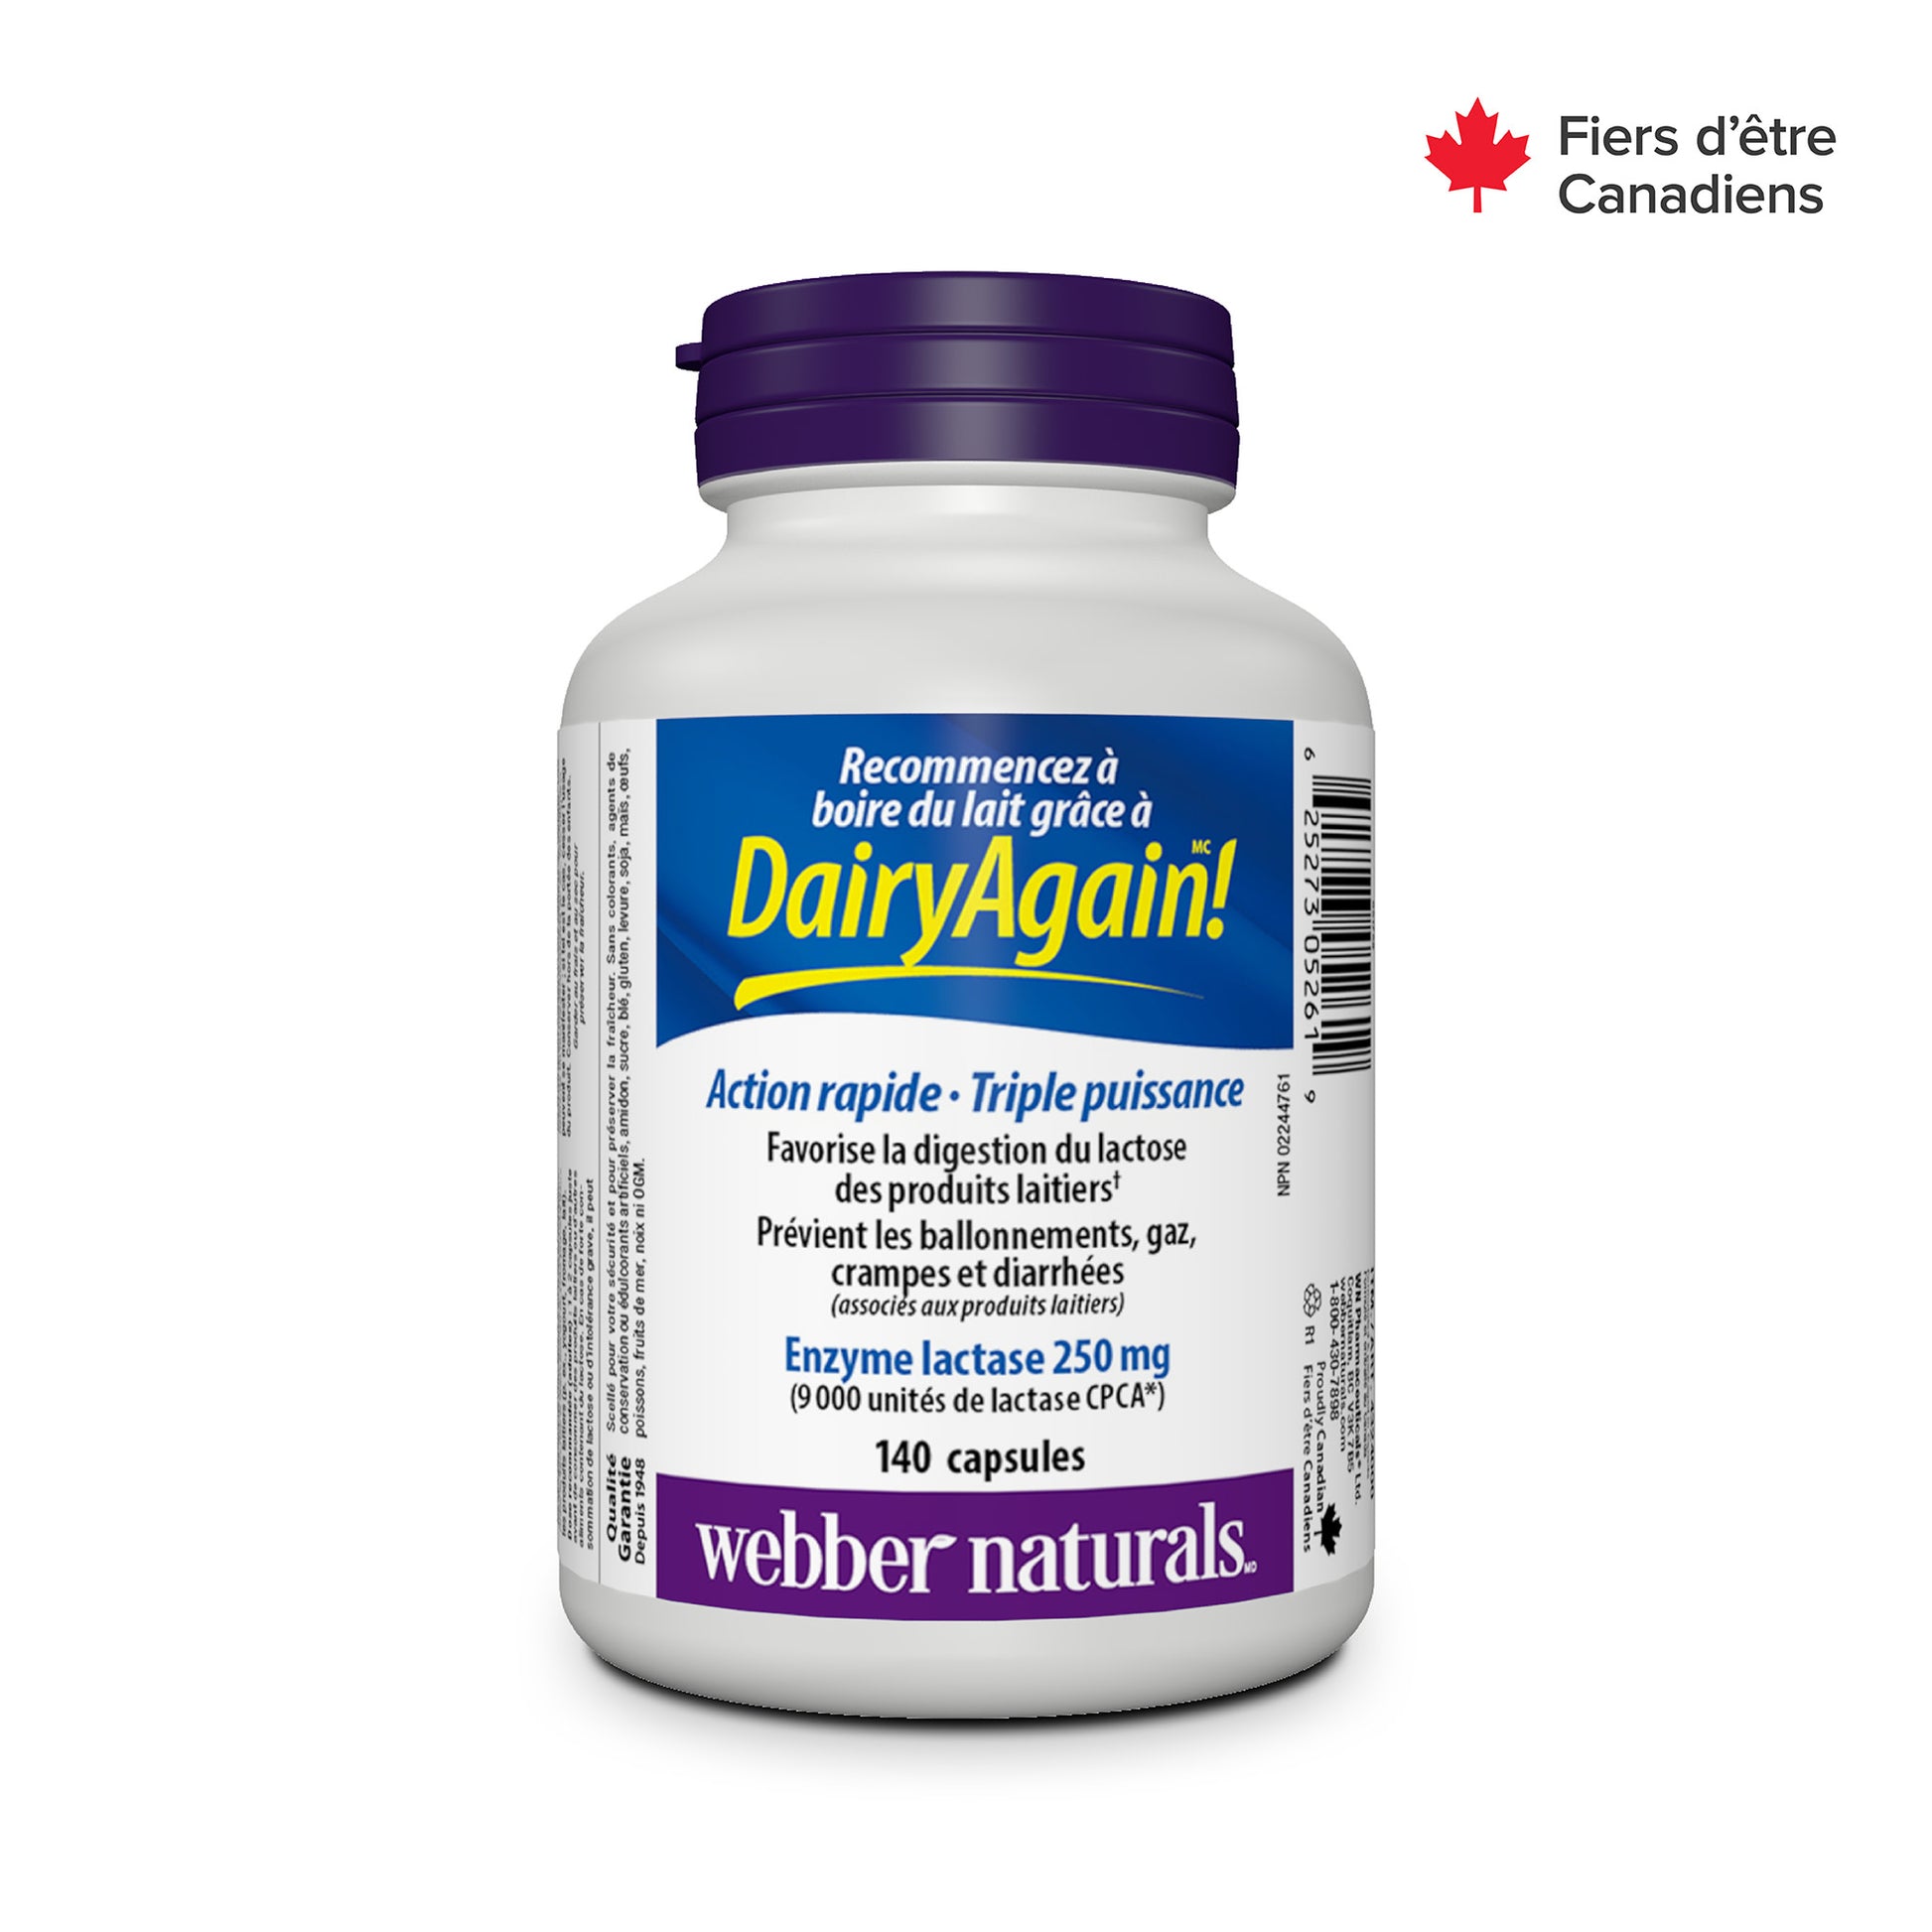 Dairy Again Enzyme Lactase Triple puissance 250 mg capsules for Webber Naturals|v|hi-res|WN5261